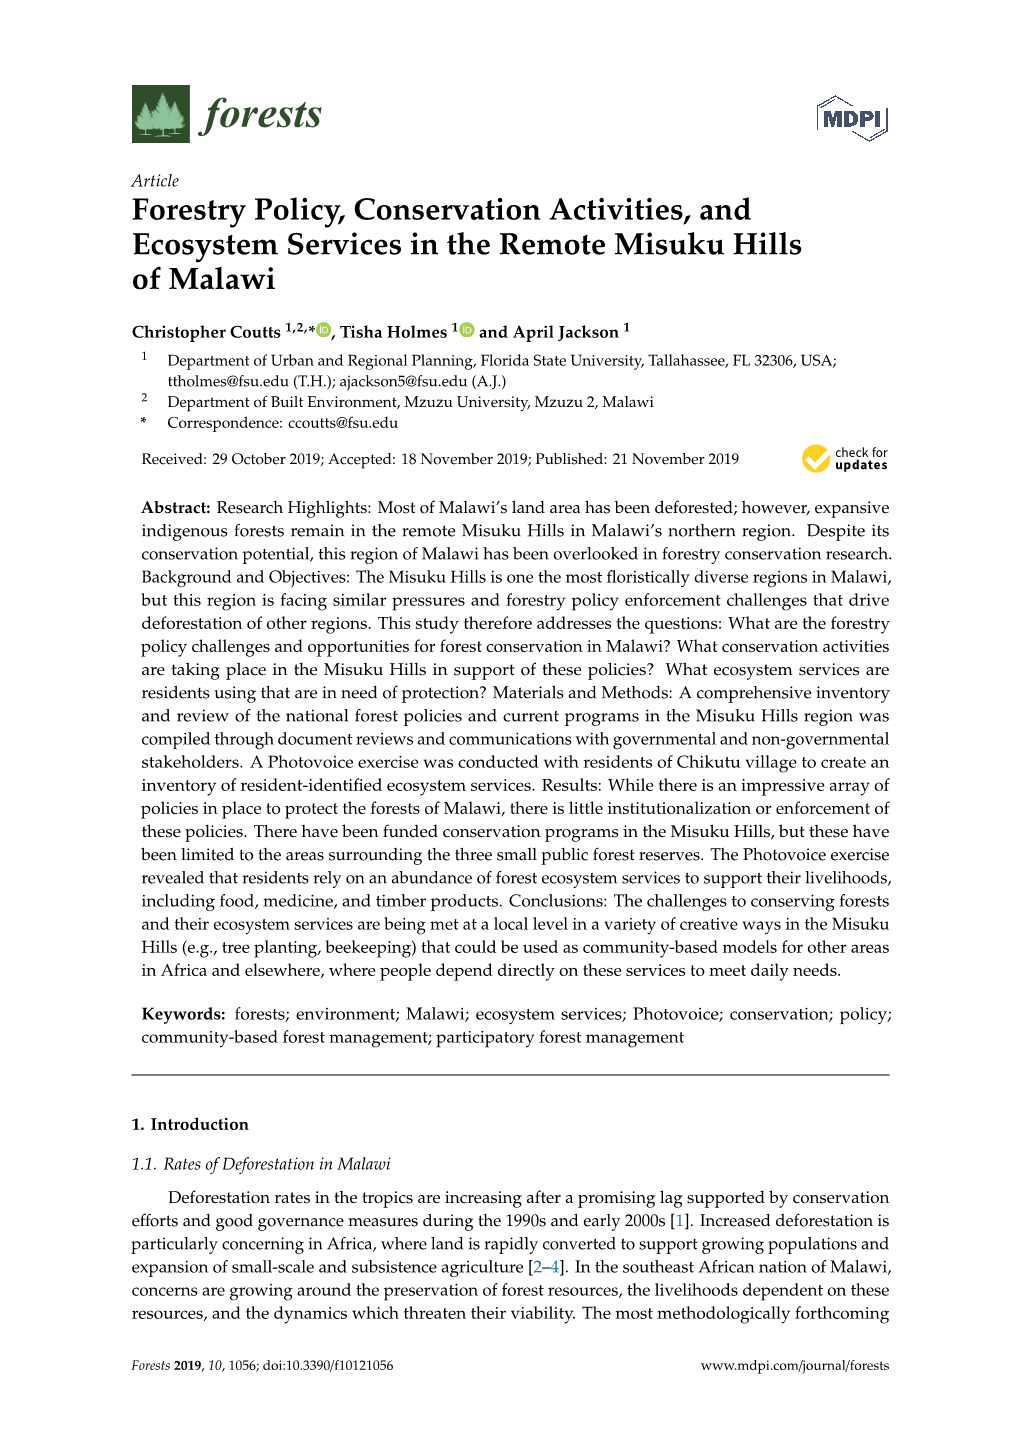 Forestry Policy, Conservation Activities, and Ecosystem Services in the Remote Misuku Hills of Malawi